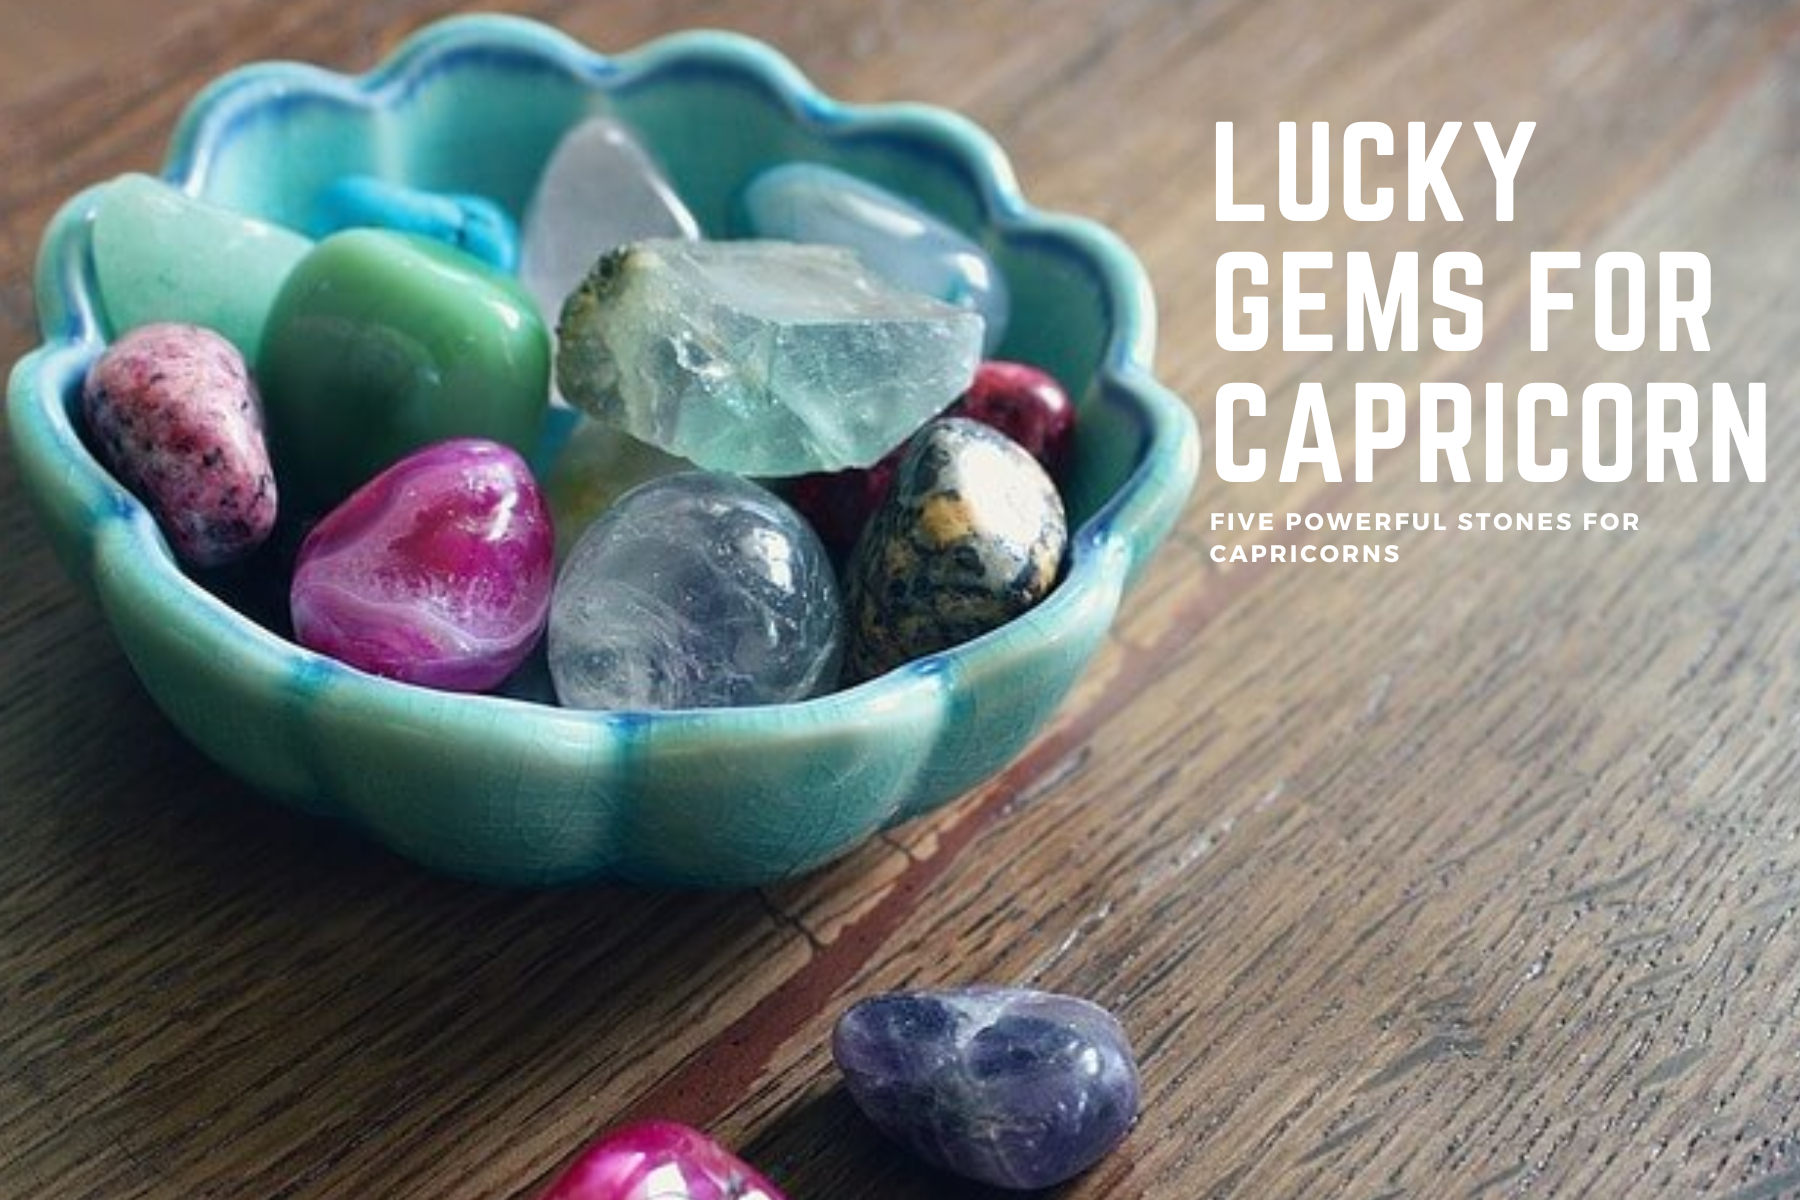 Lucky Gems For Capricorn - Five Powerful Stones For Capricorns